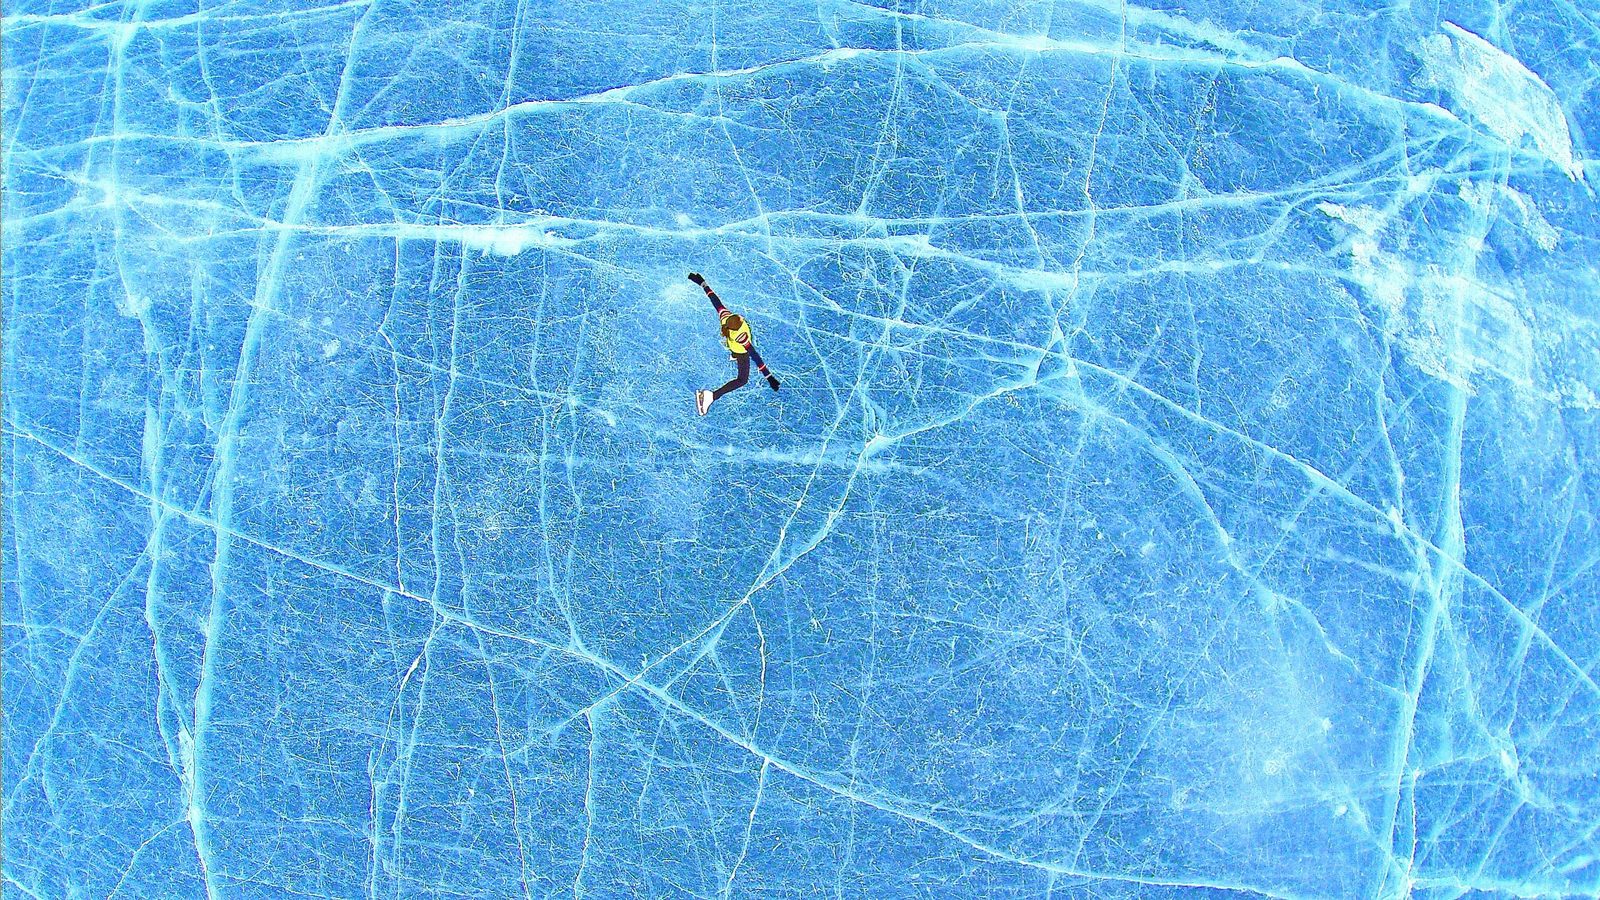 Ice skating and curling